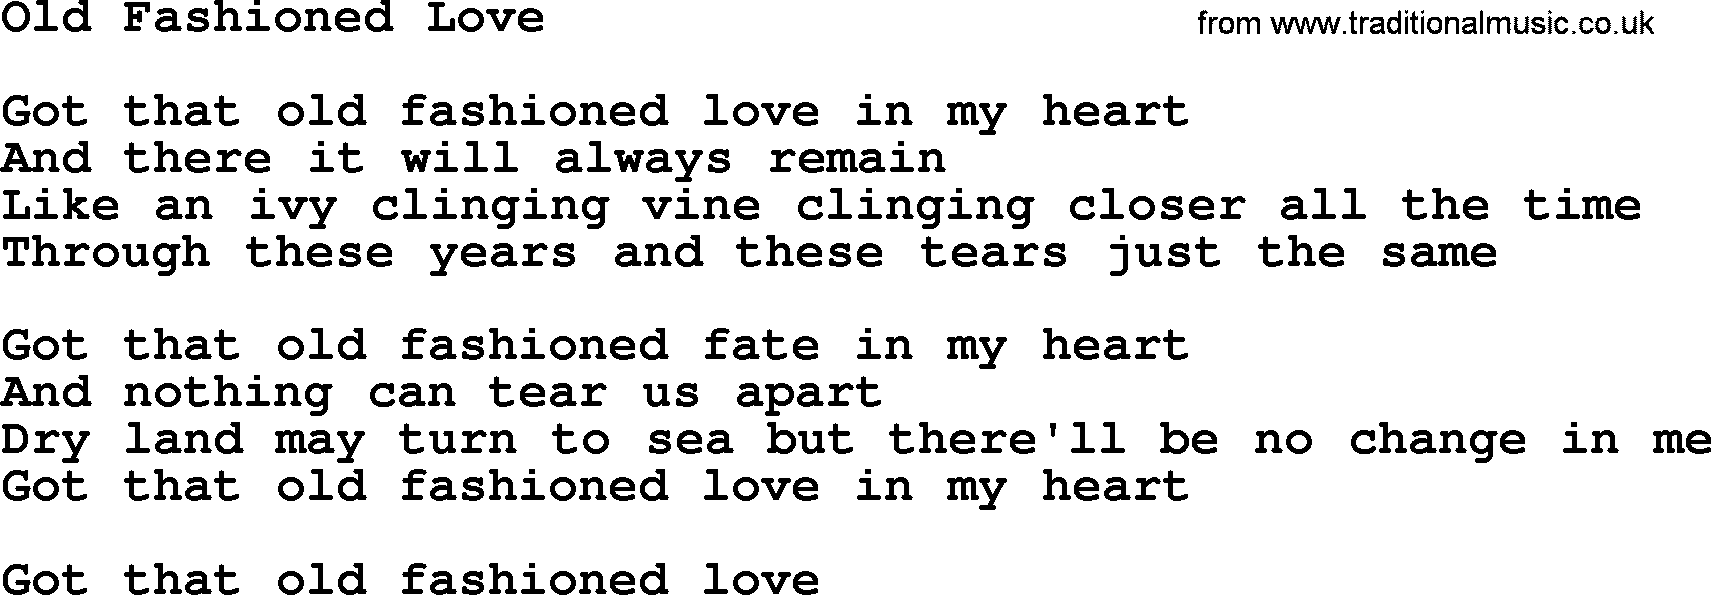 Willie Nelson song: Old Fashioned Love lyrics